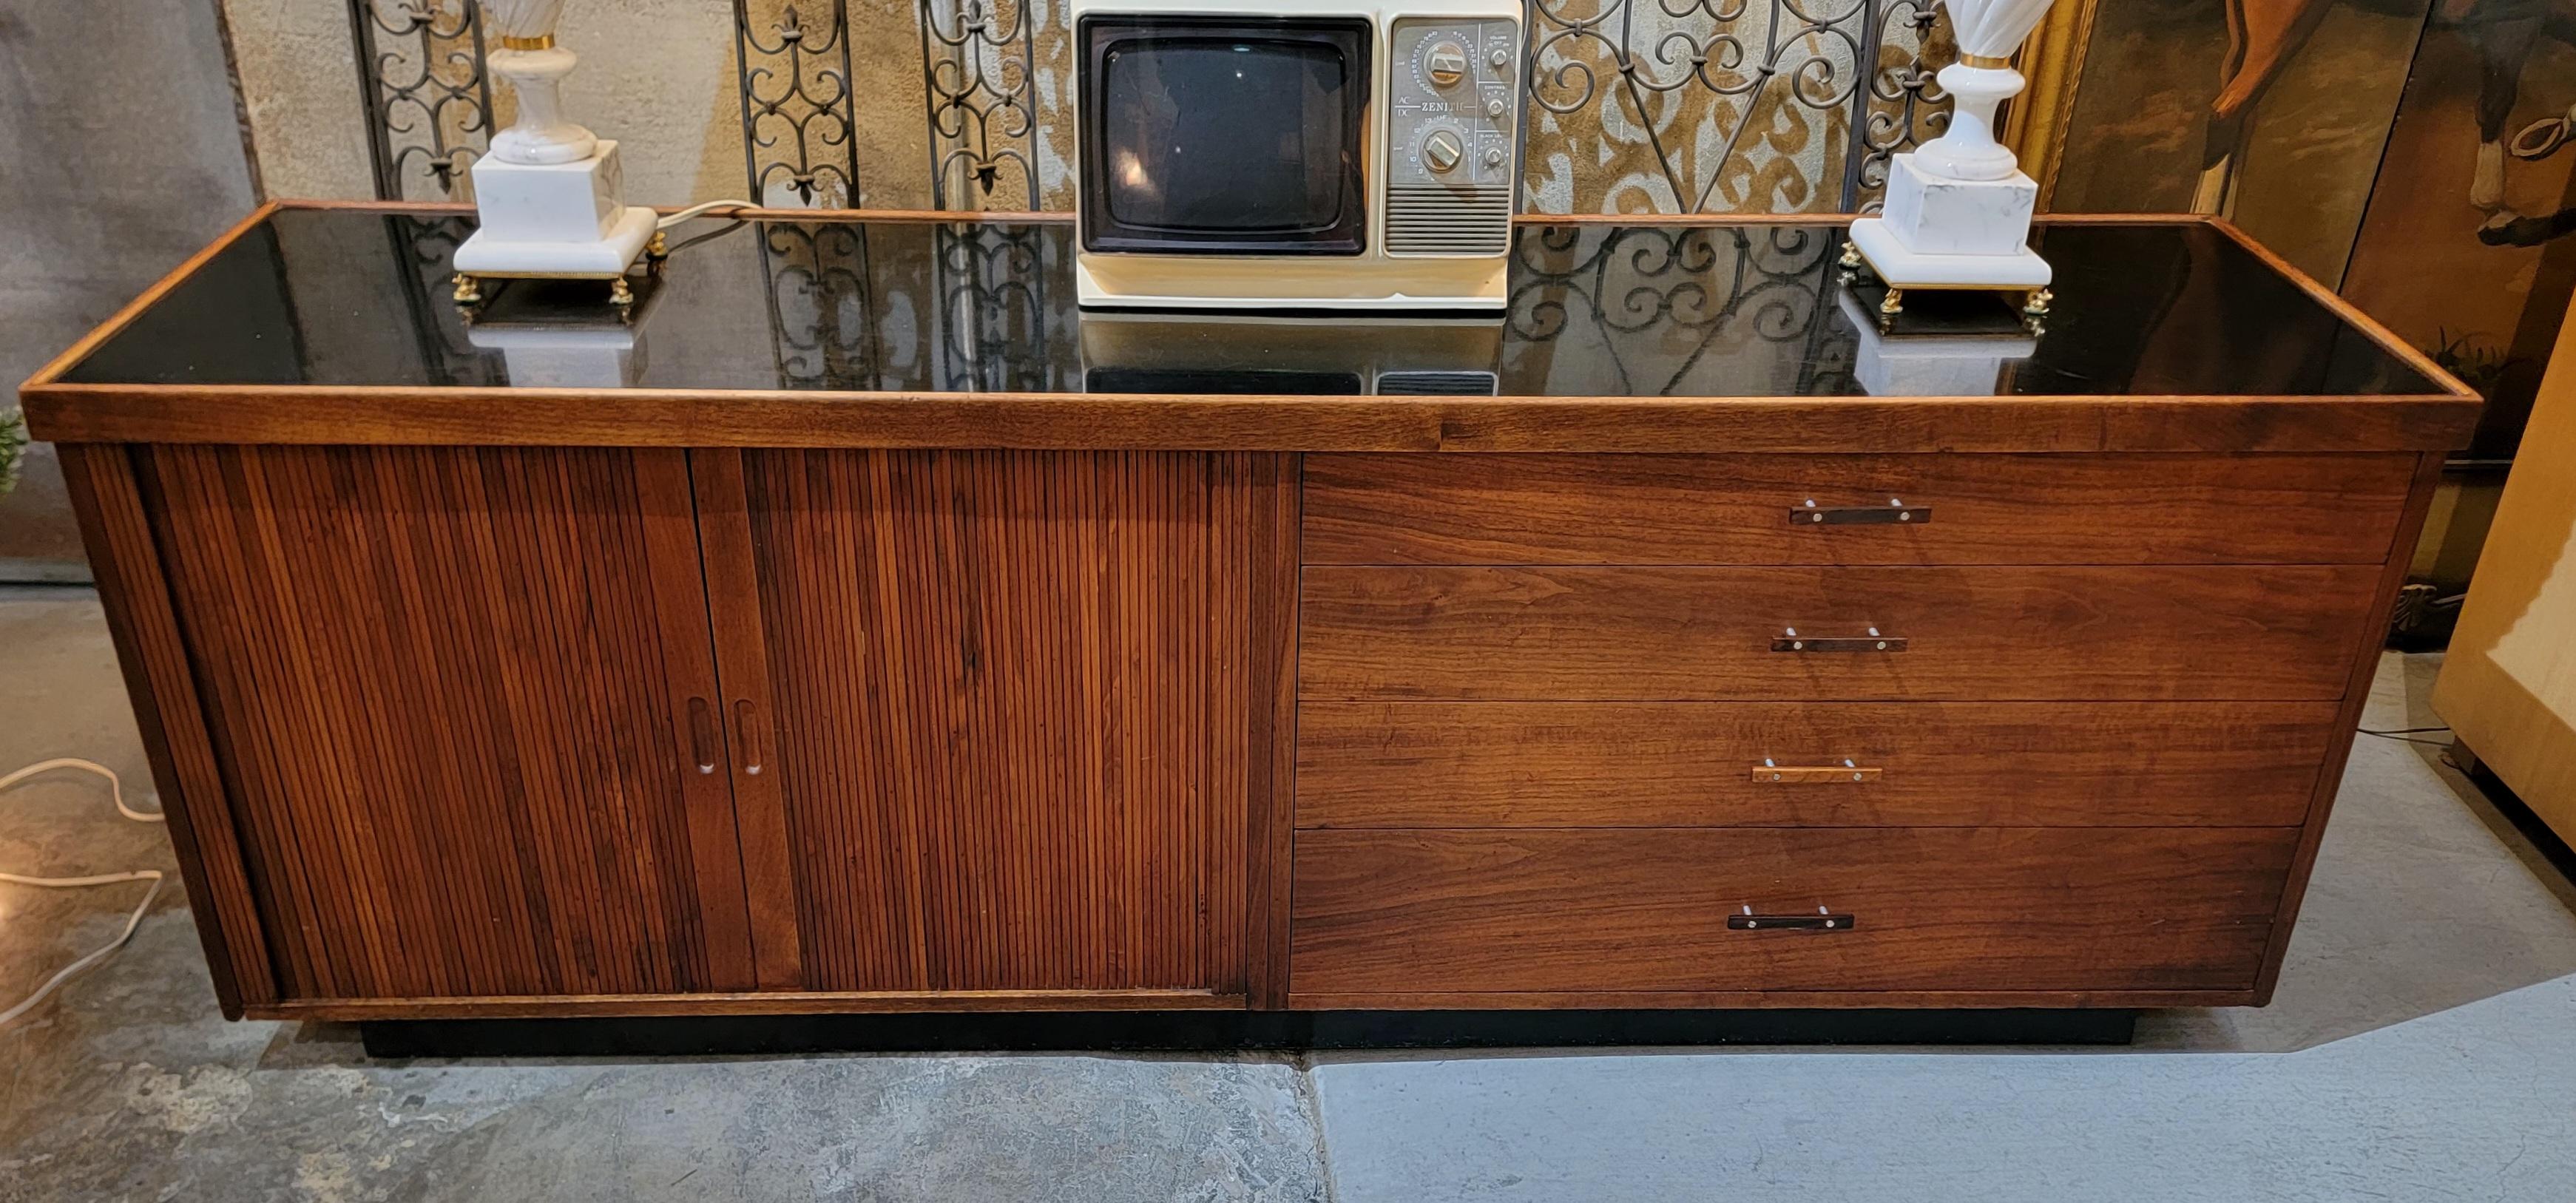 A fine Mid-Century Modern, Glenn of California, tambour door credenza. Features 2 sliding tambour doors and 4 drawers. Black glass top insert. (waterproof top word work well as a bar or cocktail cabinet). All wood construction with dovetail drawers.